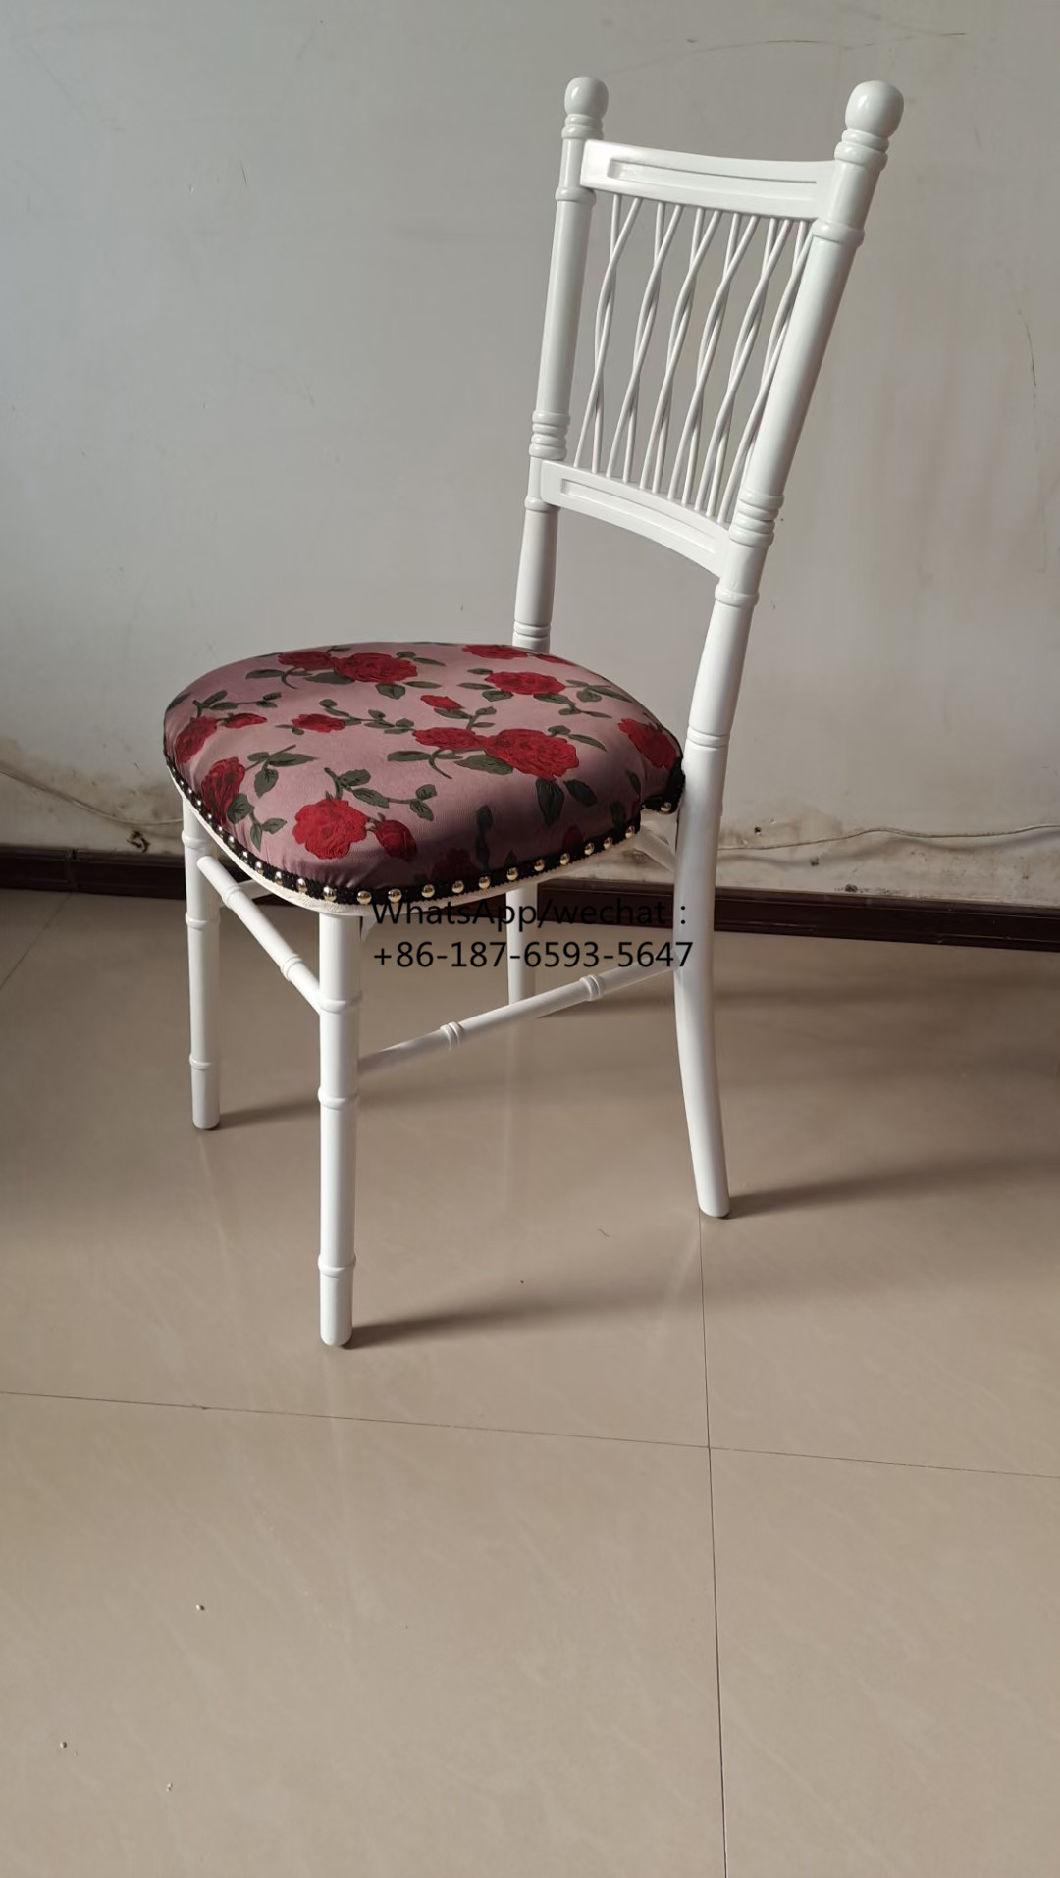 New Arrival Wedding Chair with Revet Cushion